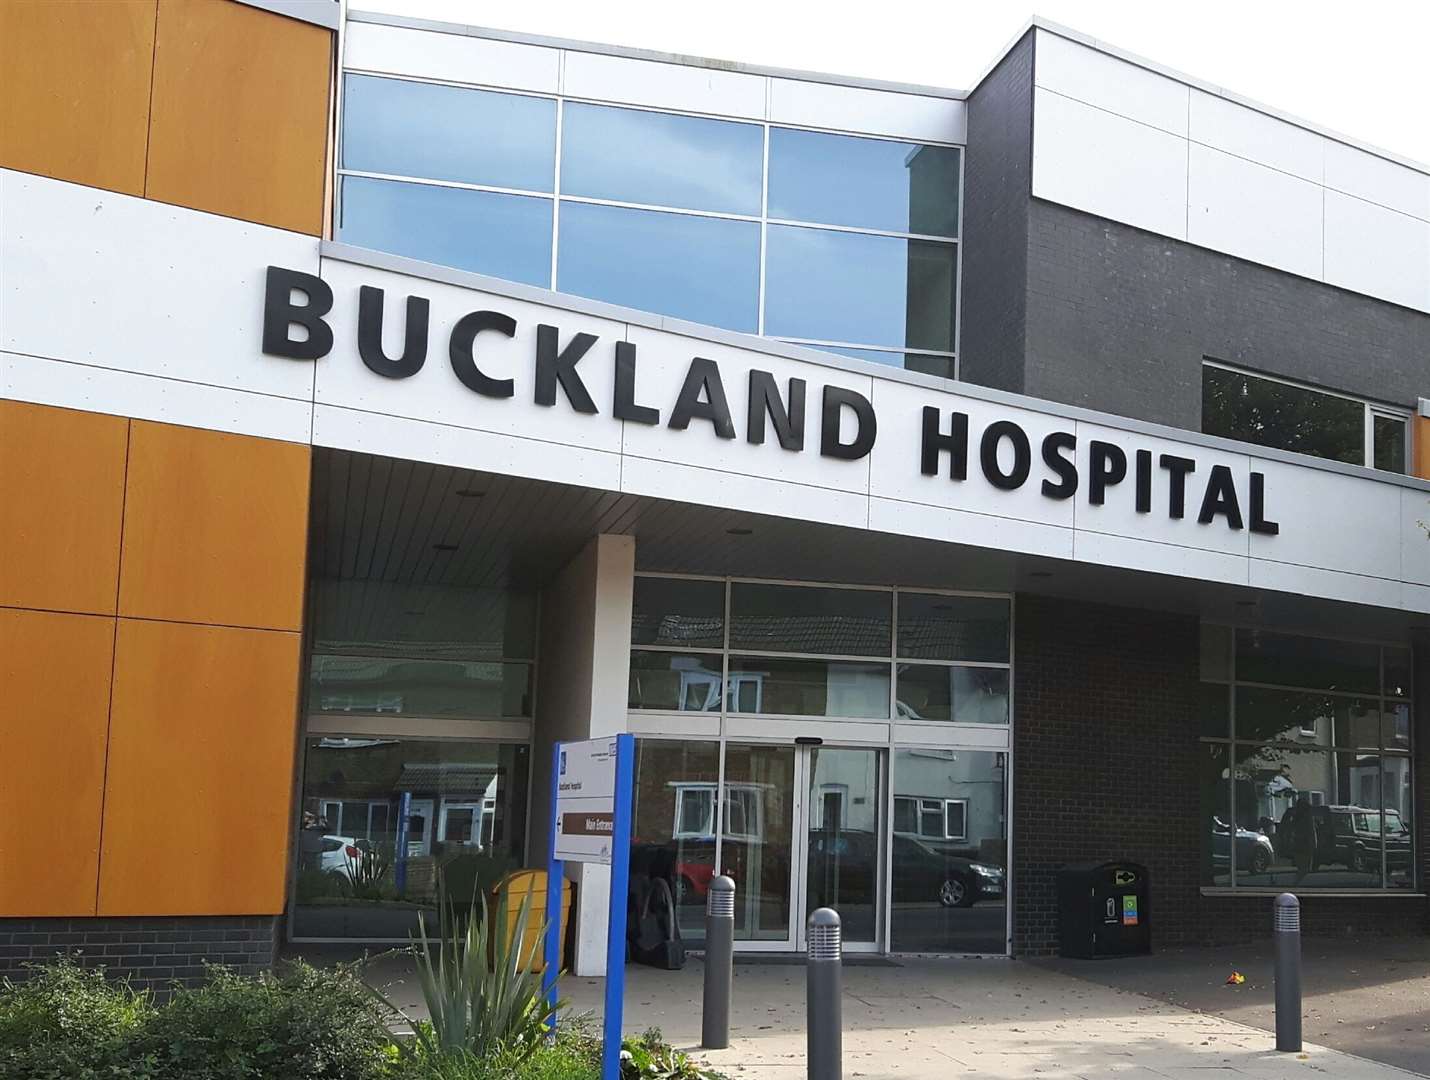 The grandmother worked at Buckland Hospital, where she specialised in dermatology